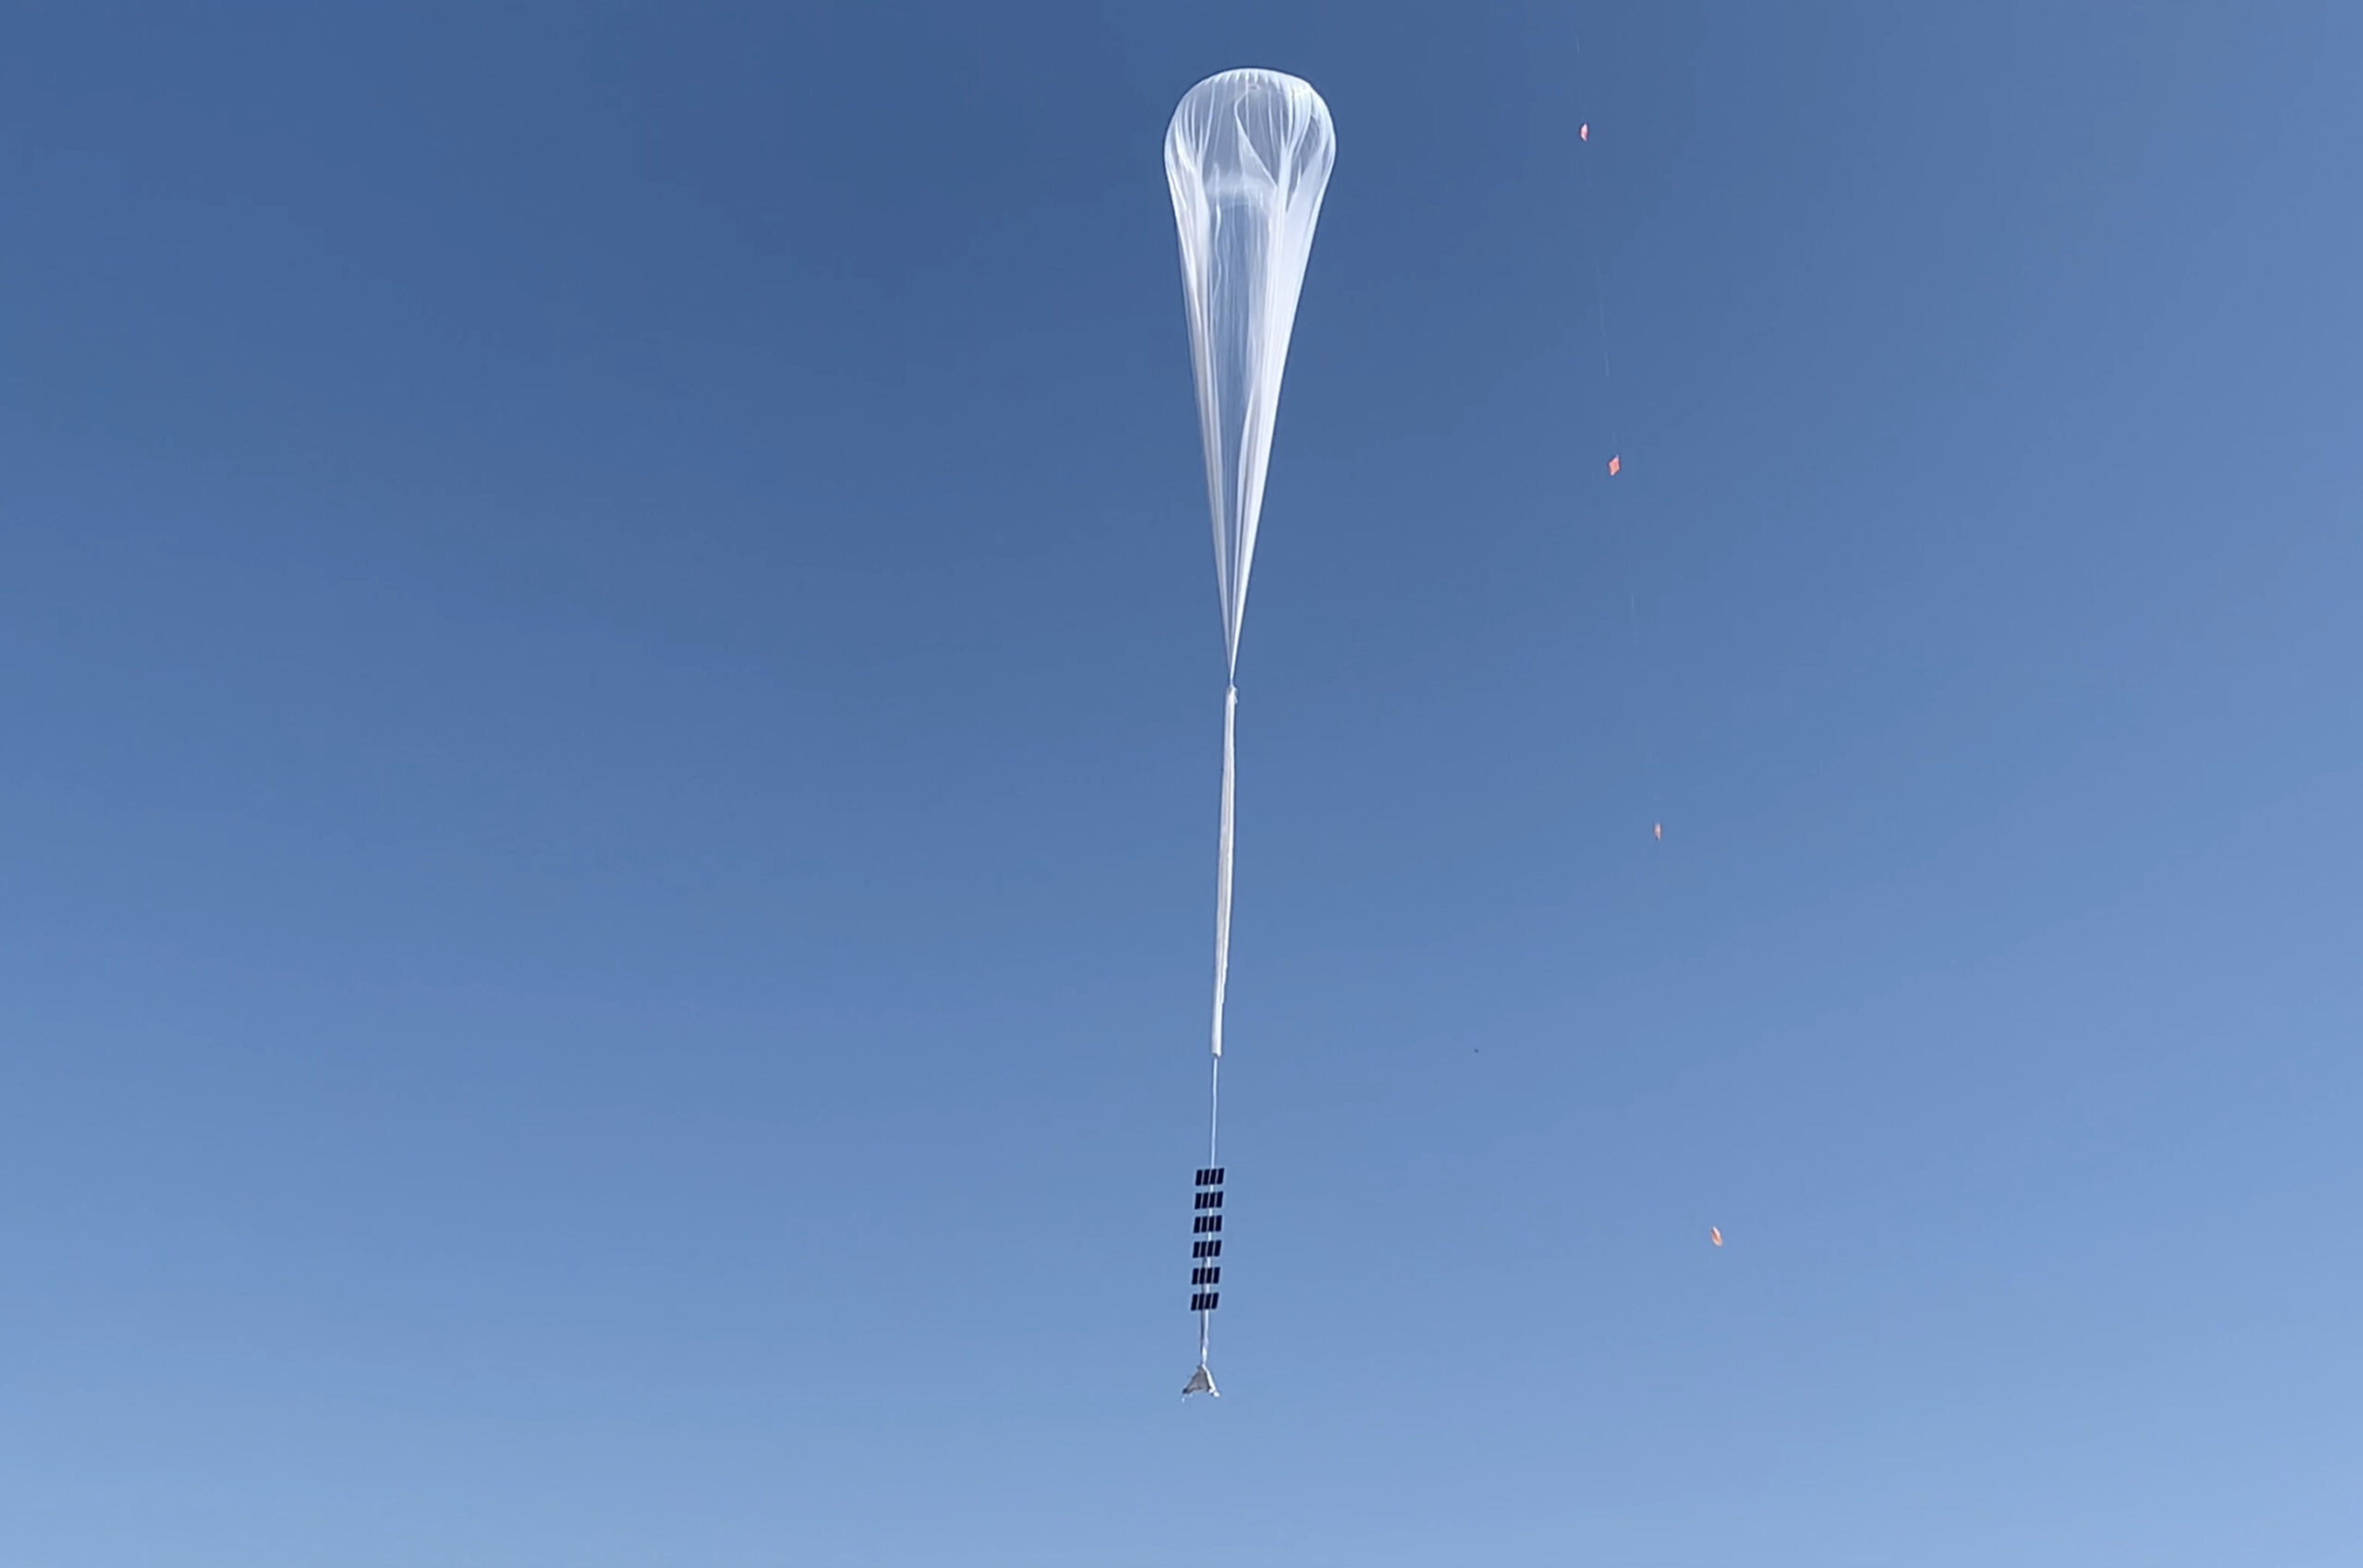 SET and World View Partner to Collect Scientific Data on Earth’s Stratosphere